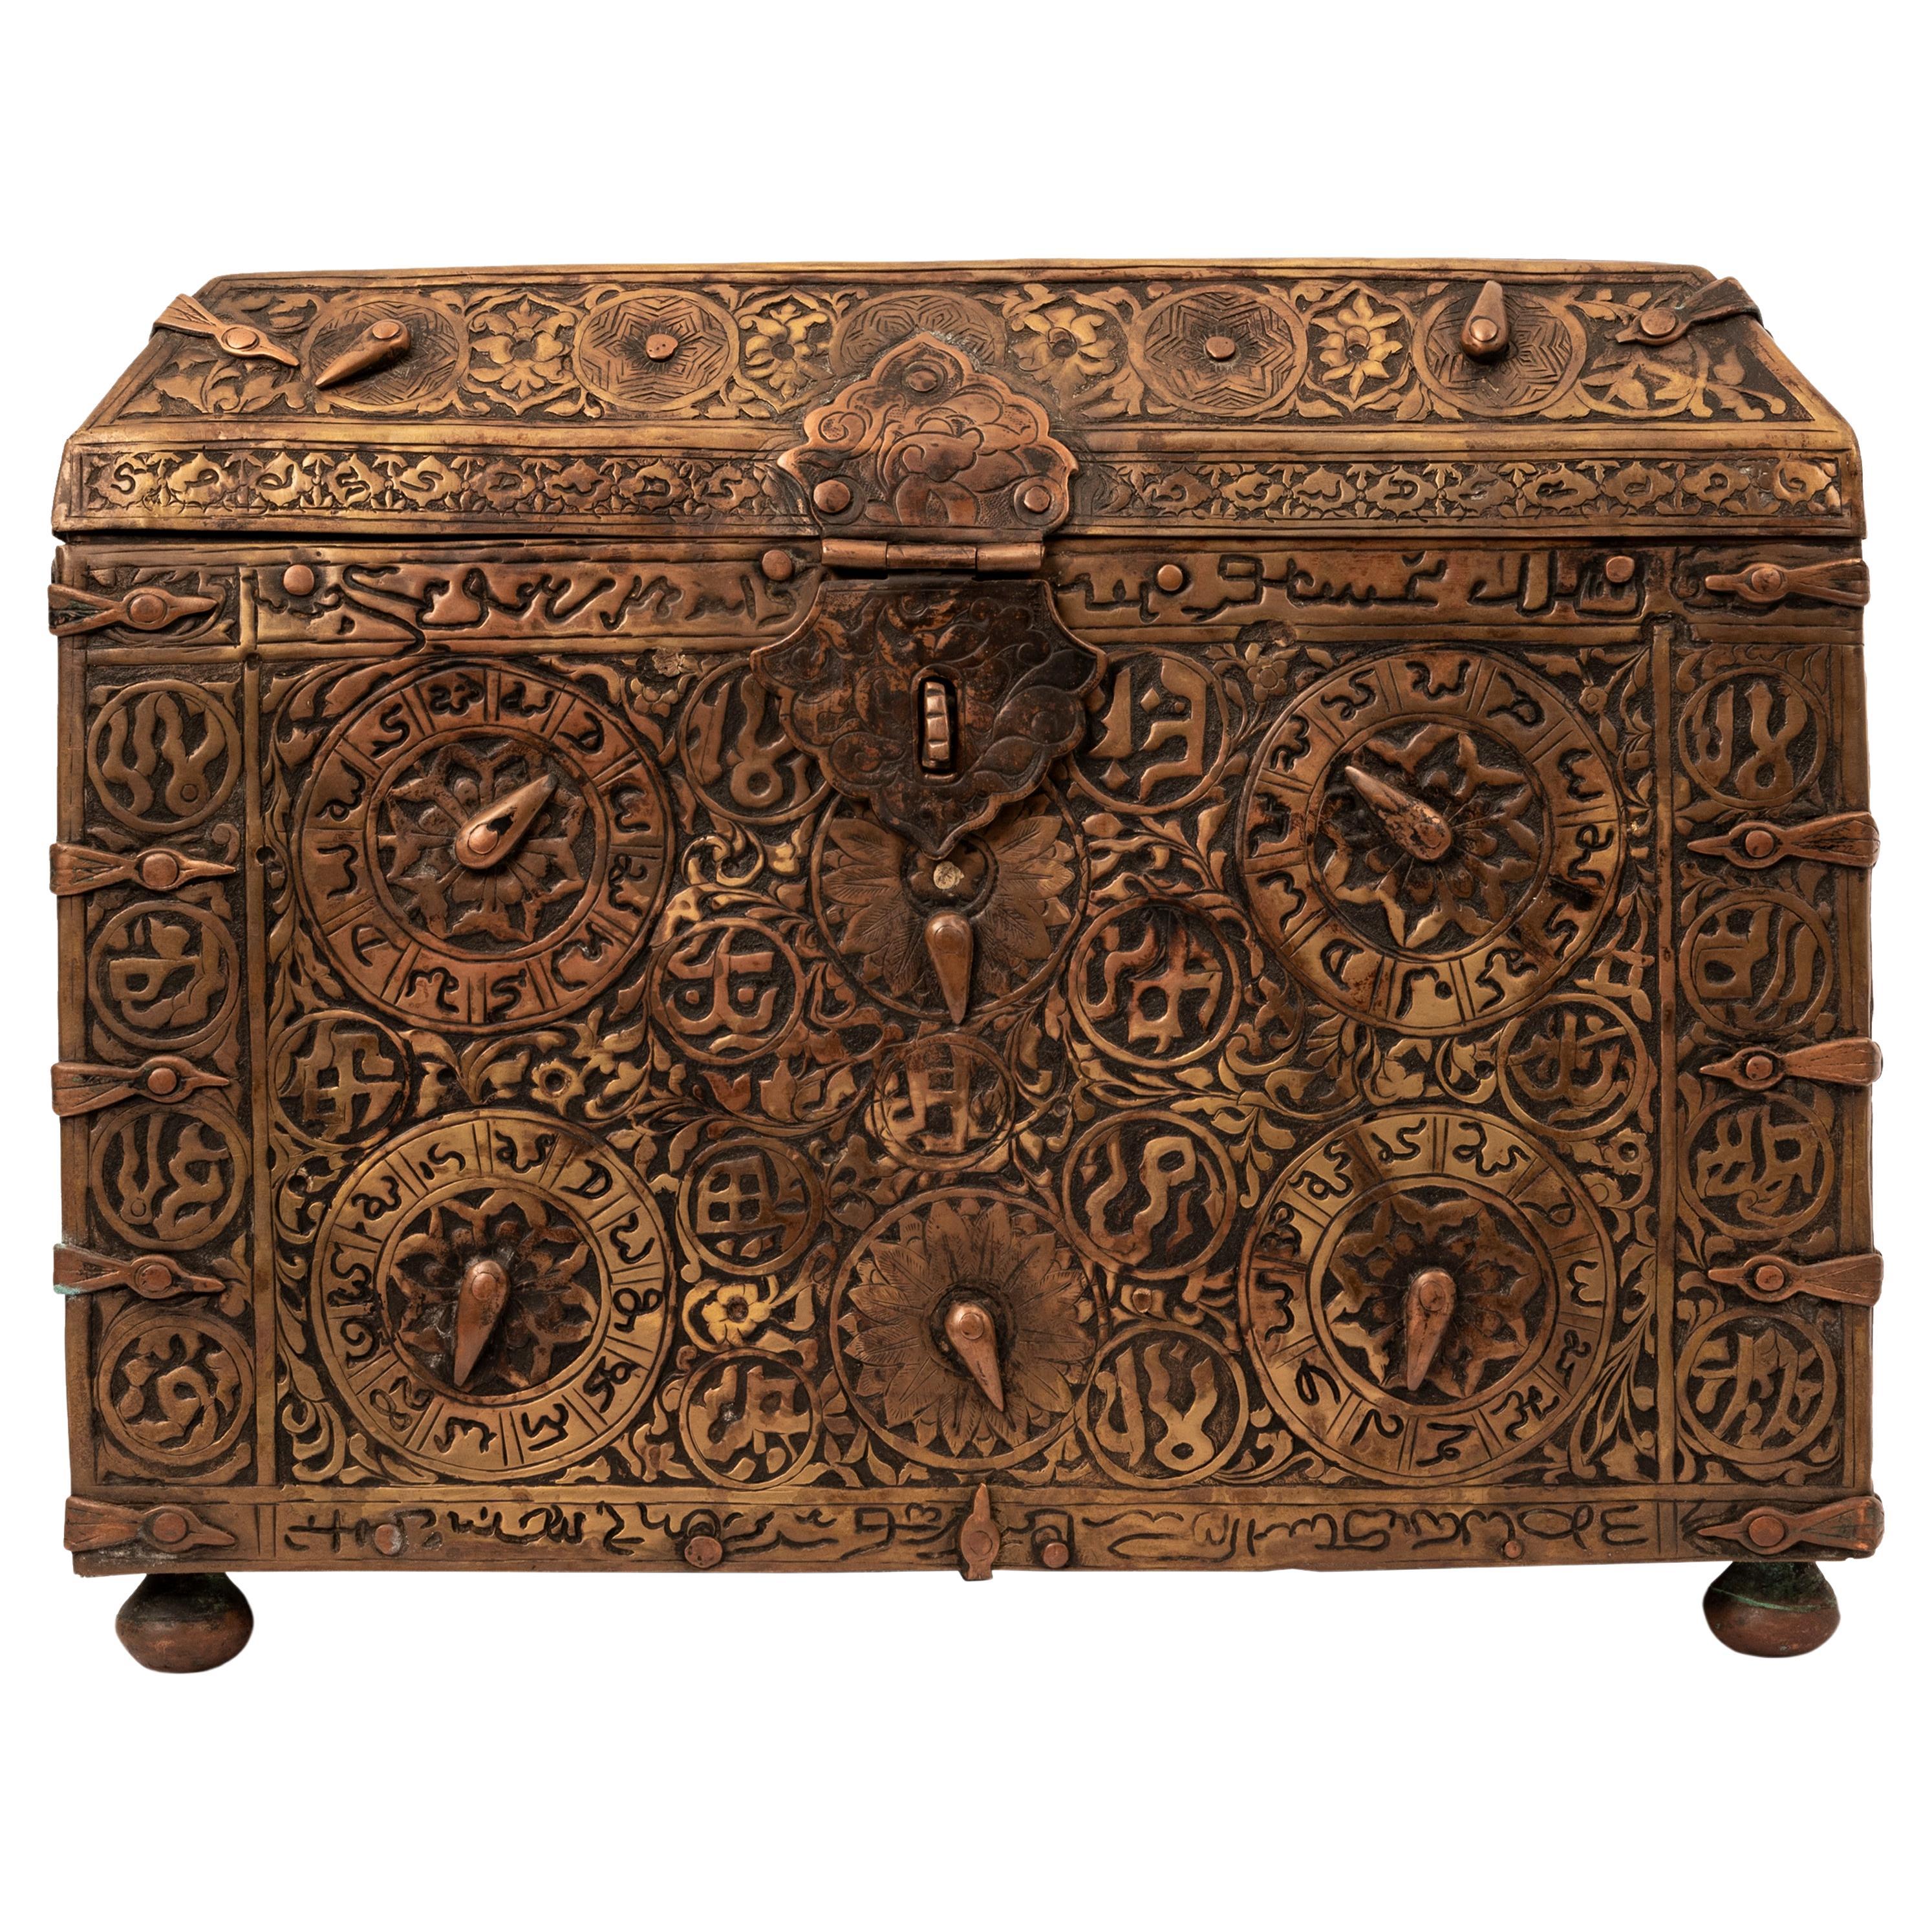 A highly important engraved Islamic combination locking brass casket, based on a design by the 12th Century Arab inventor & artist Ismail Al Jazari. Circa 1550.
The casket from the mid 16th century (or possibly earlier) Safavid period & having a